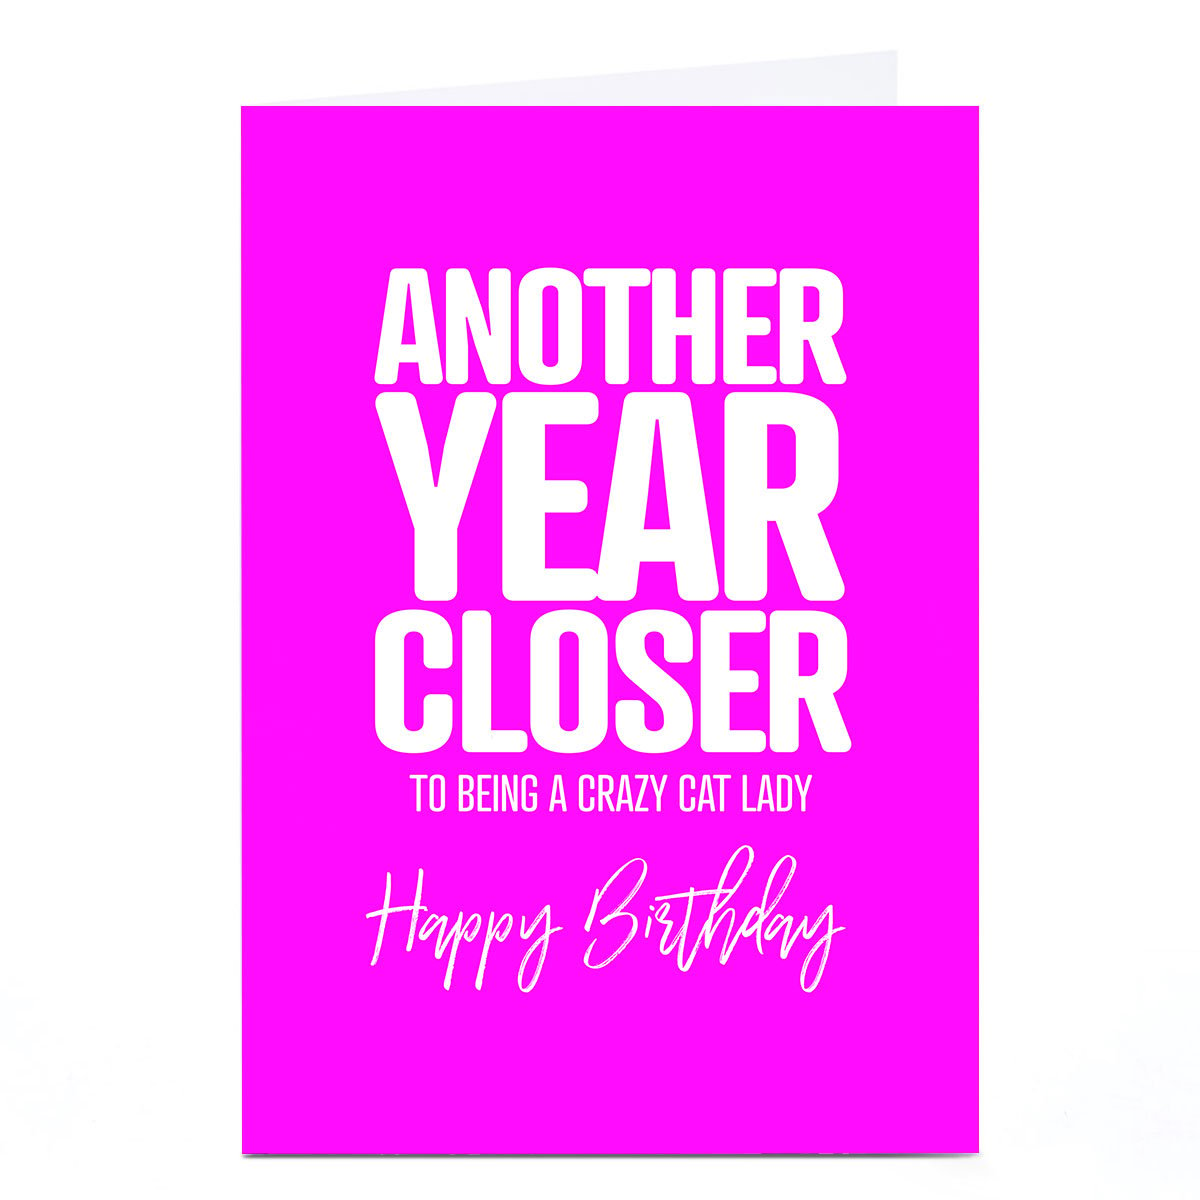 Personalised Punk Birthday Card - Another Year Closer